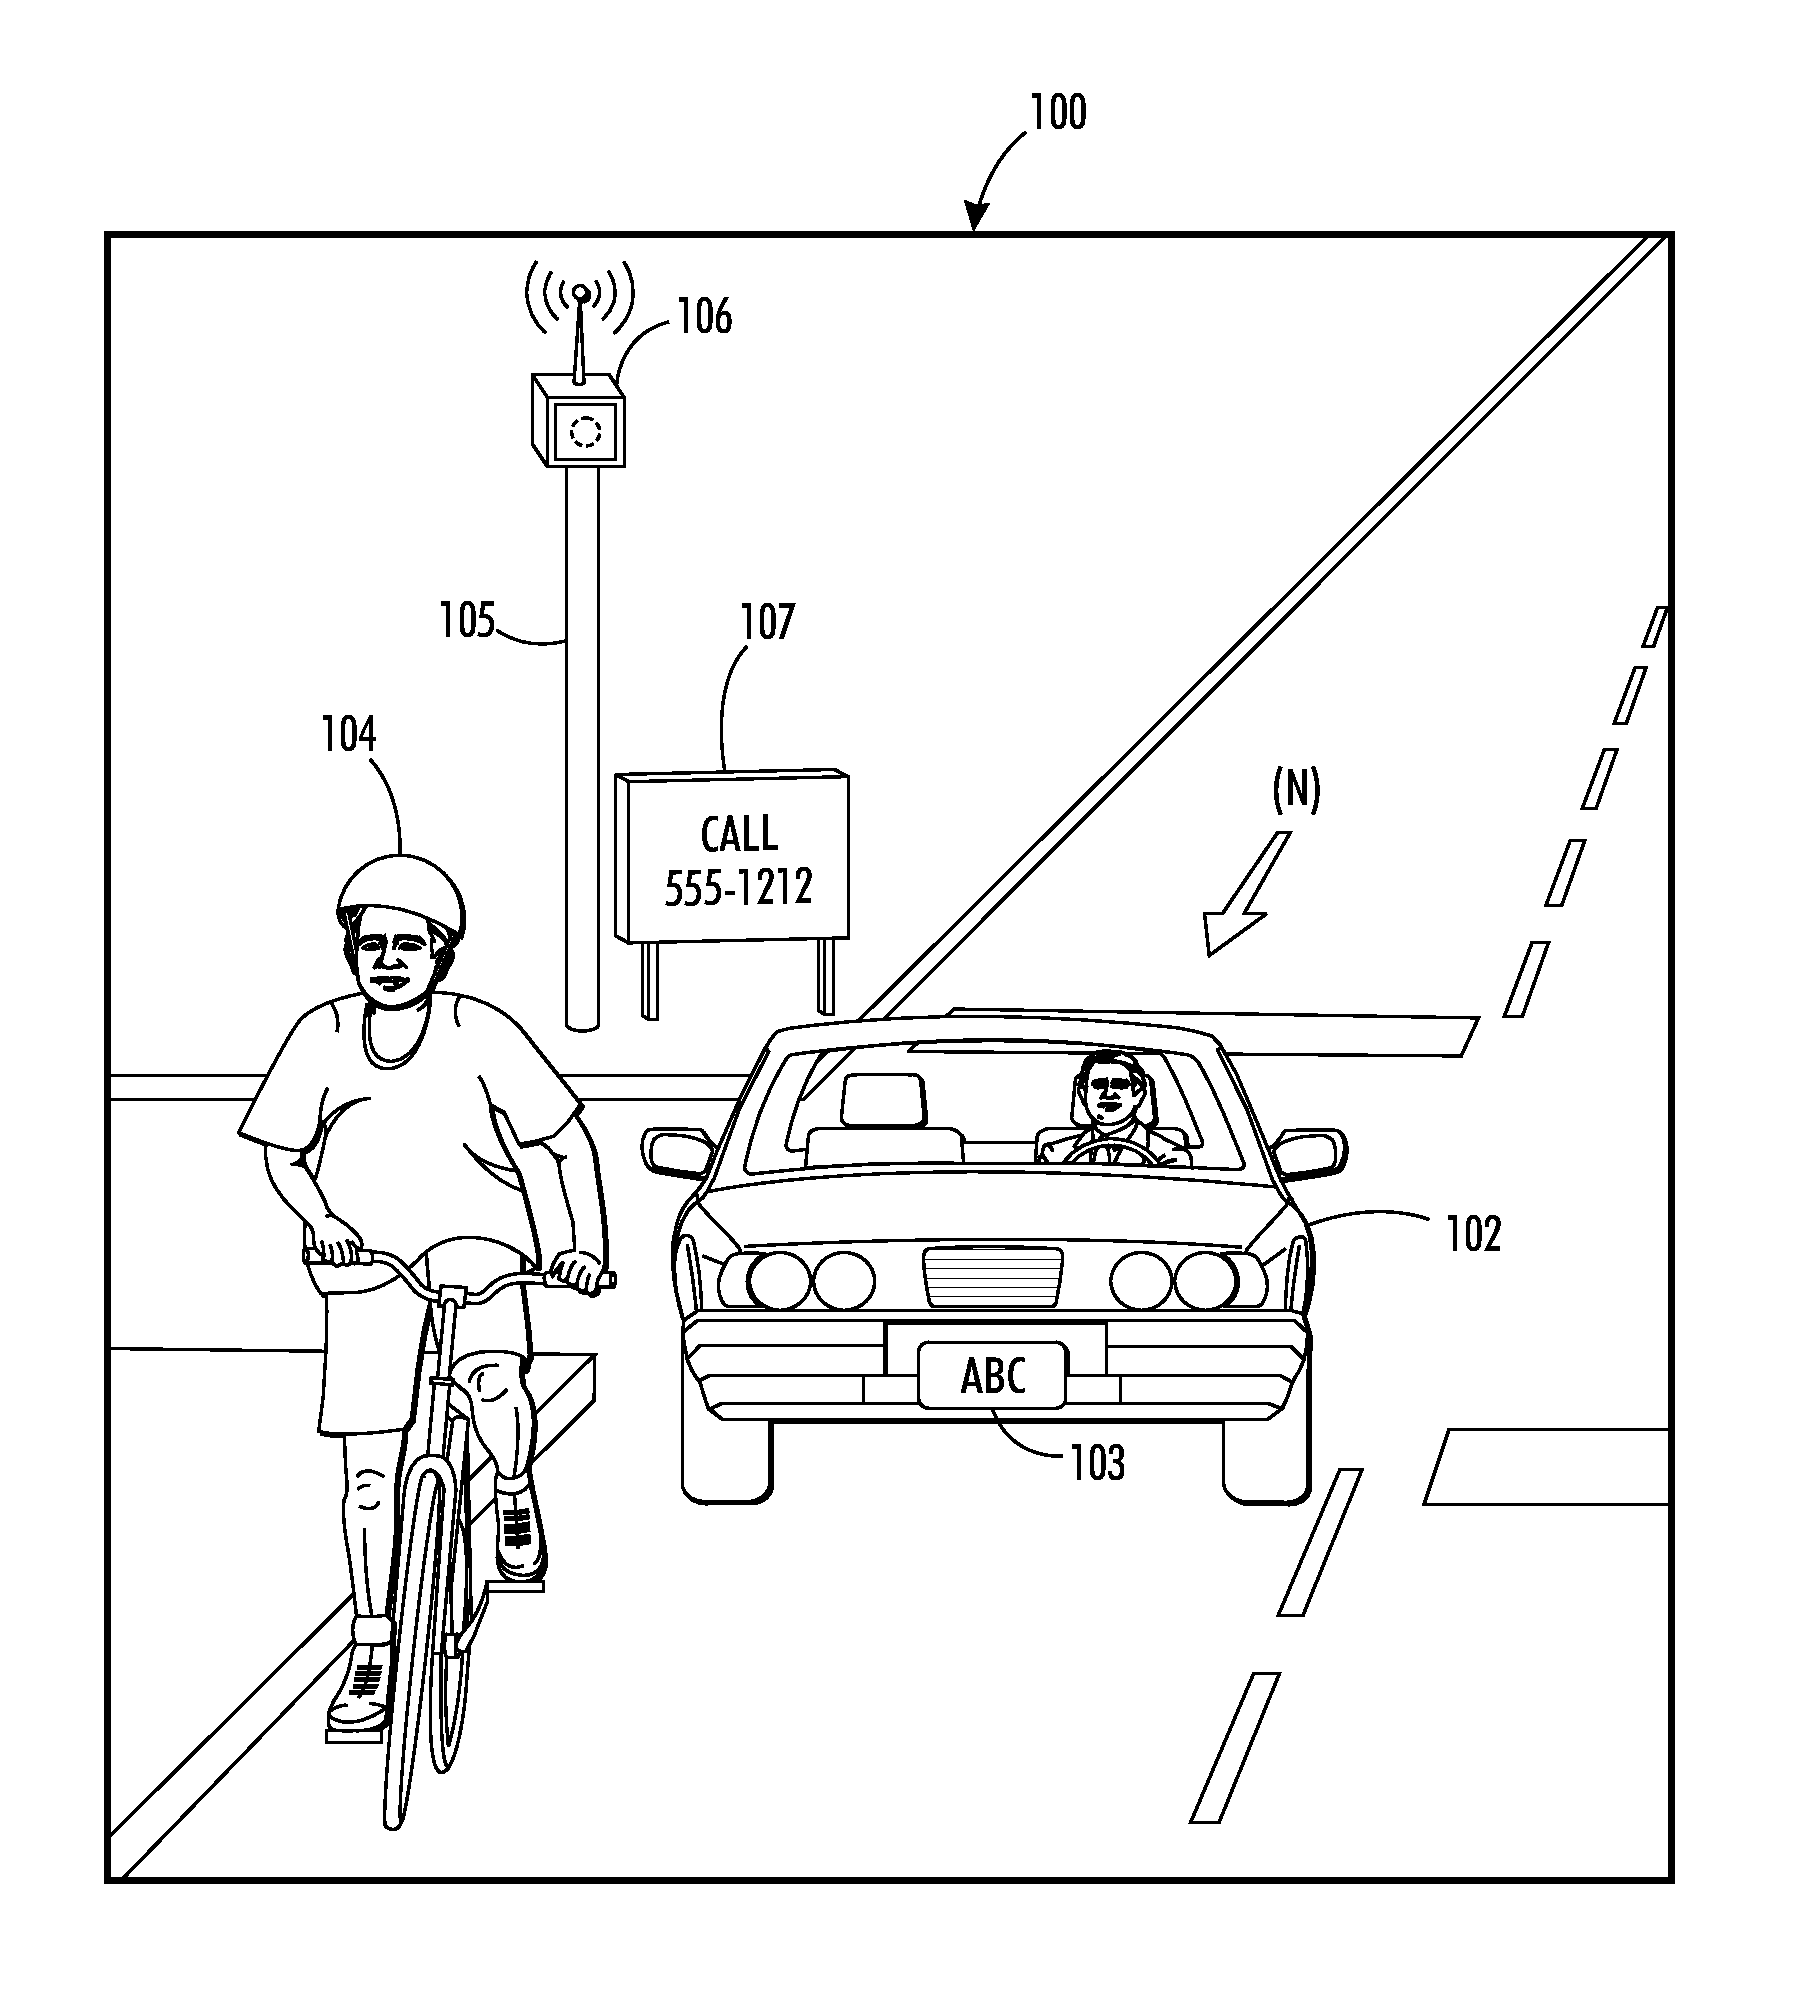 Obscuring identification information in an image of a vehicle